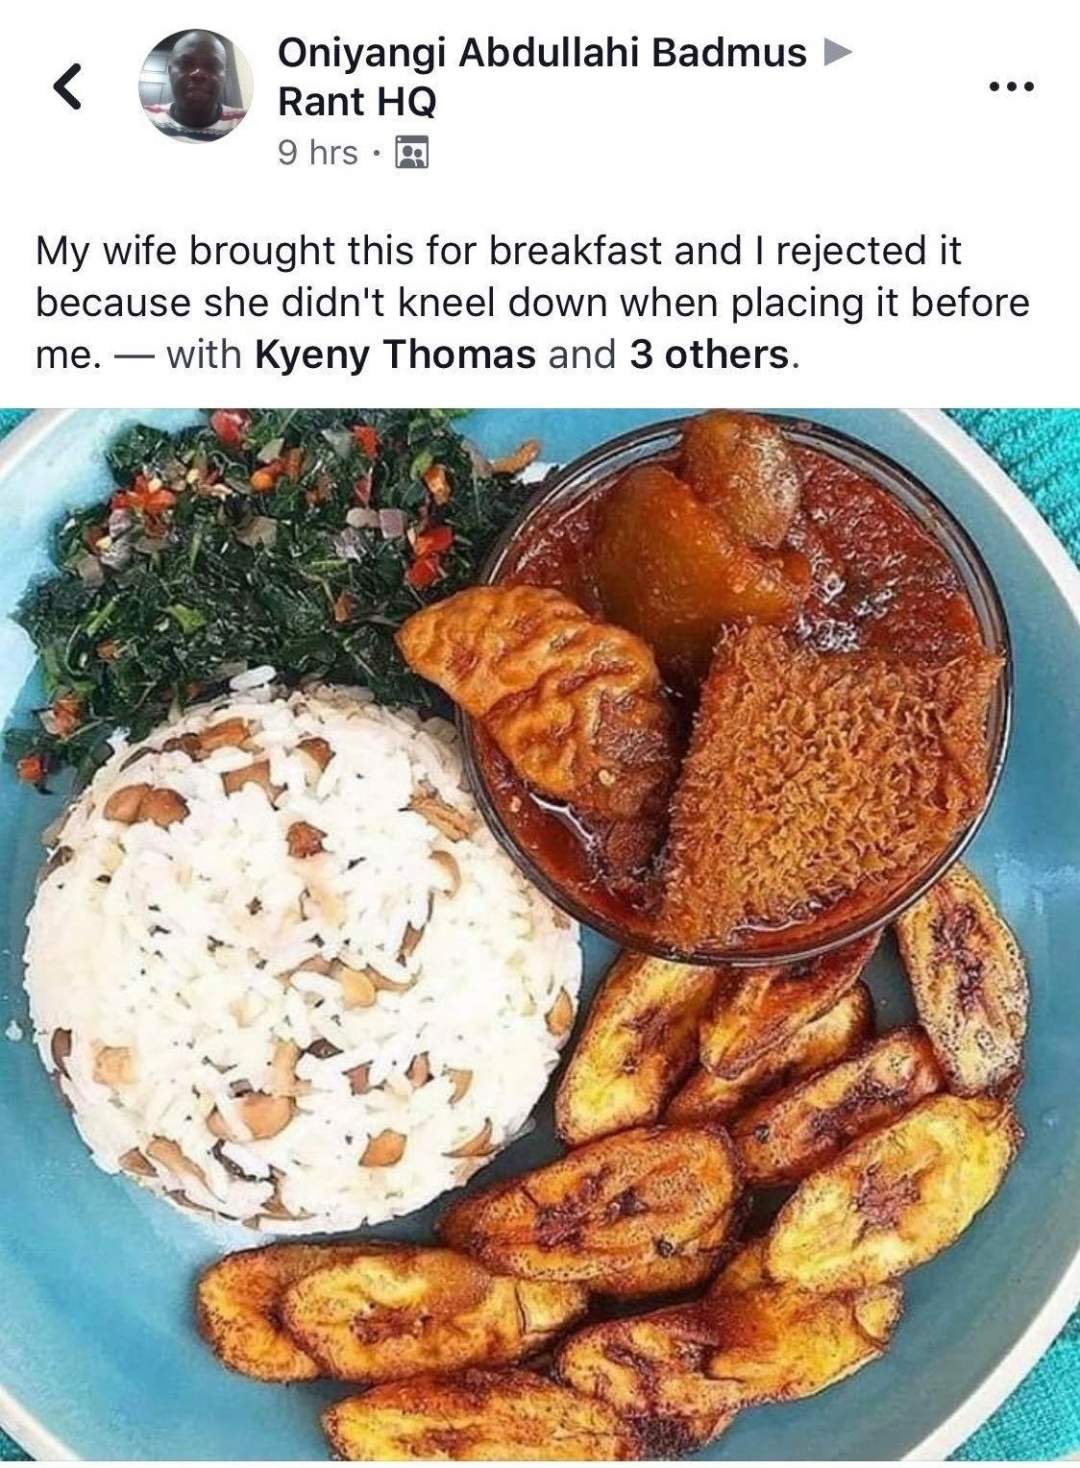 Nigerian man reveals why he rejected the meal his wife made for him